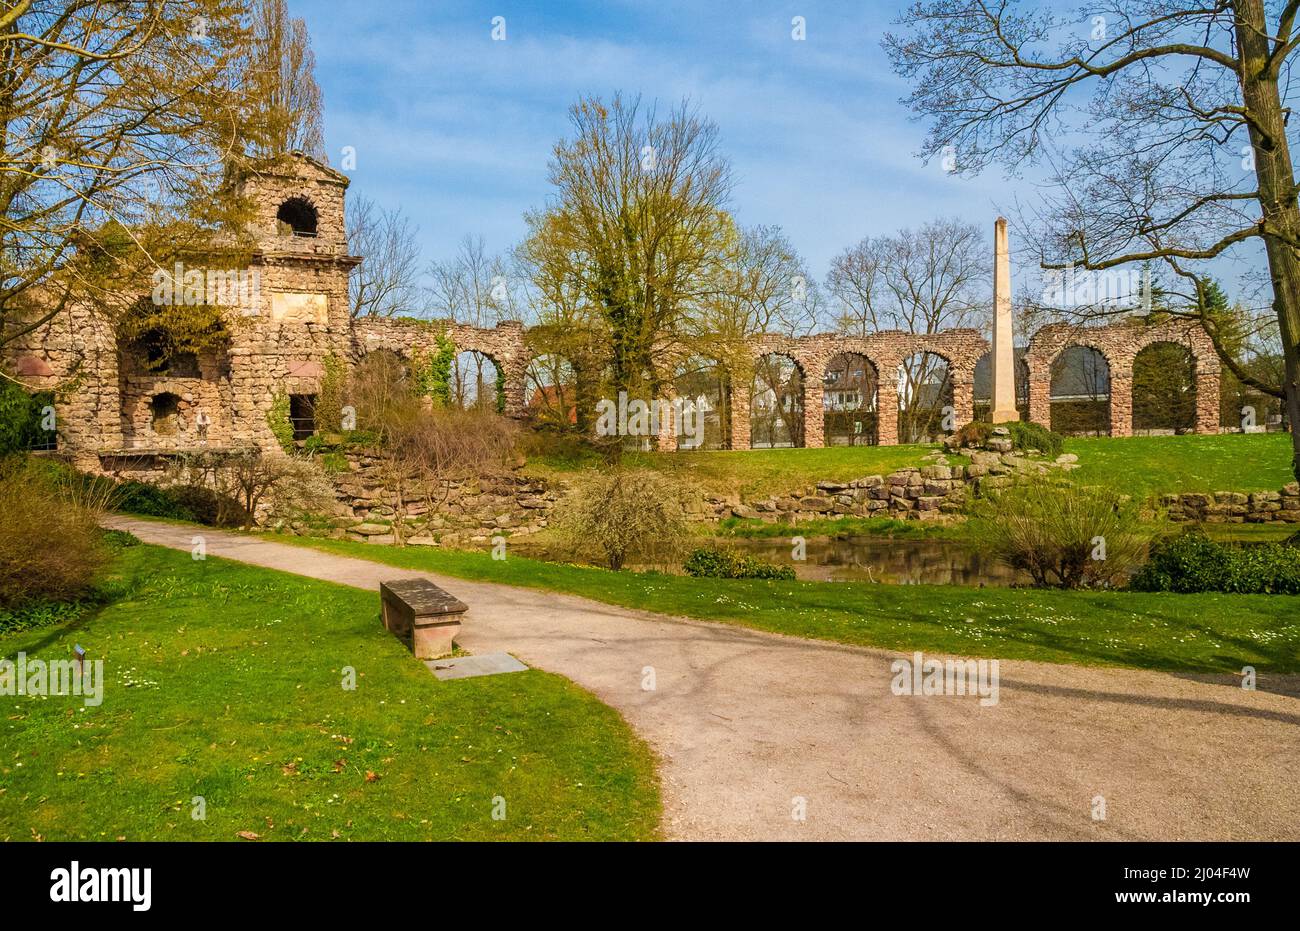 Lovely scenic view of the artificial ruins of a Roman water fort with an attached aqueduct built by Nicolas de Pigage in the English landscape garden... Stock Photo